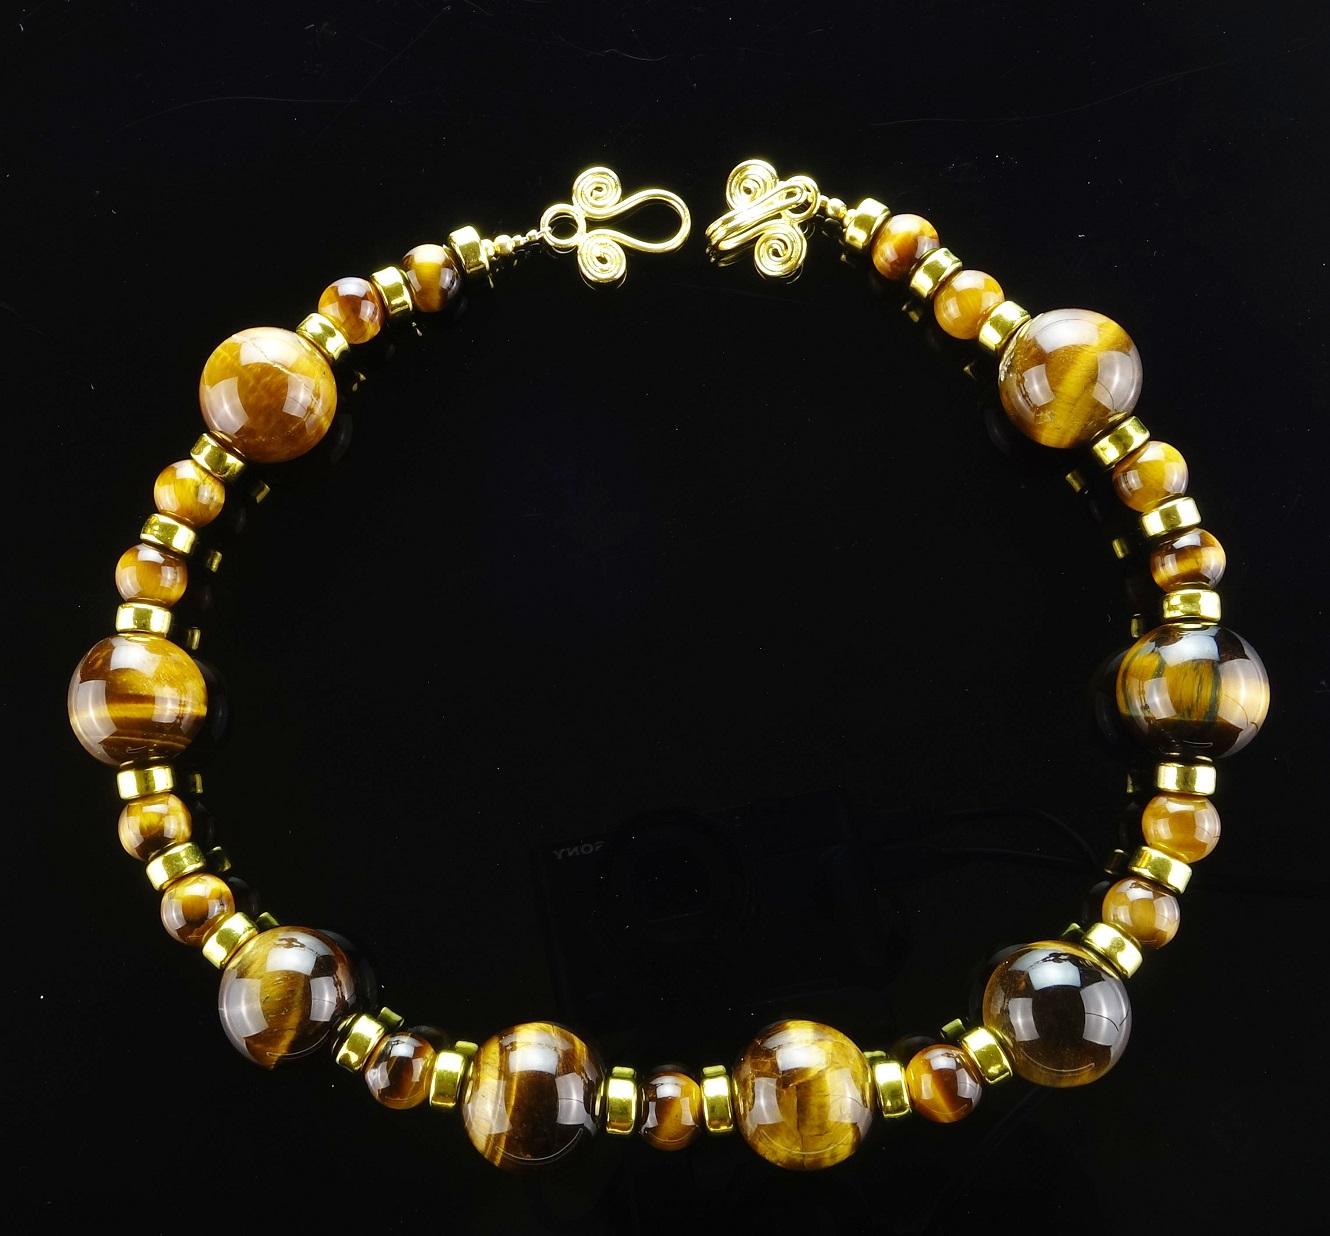 Bead AJD Necklace of Two Sizes of Chatoyant Tiger’s Eye